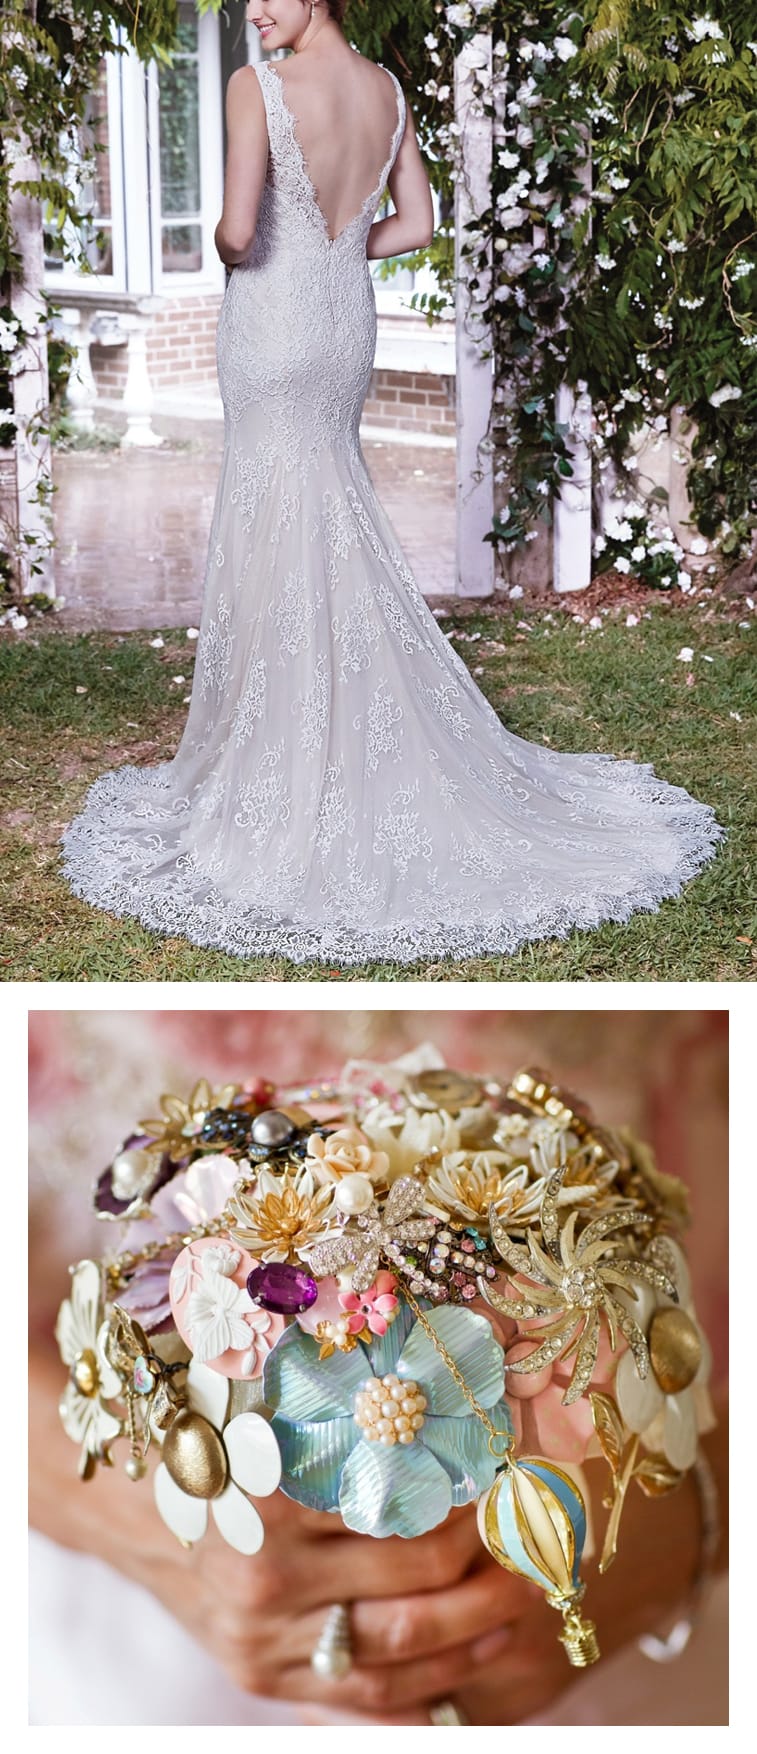 9 Bouquets For Your Boho Wedding Gown - Boho lace wedding dress with long train Lauren by Rebecca Ingram paired with a brooch bouquet.